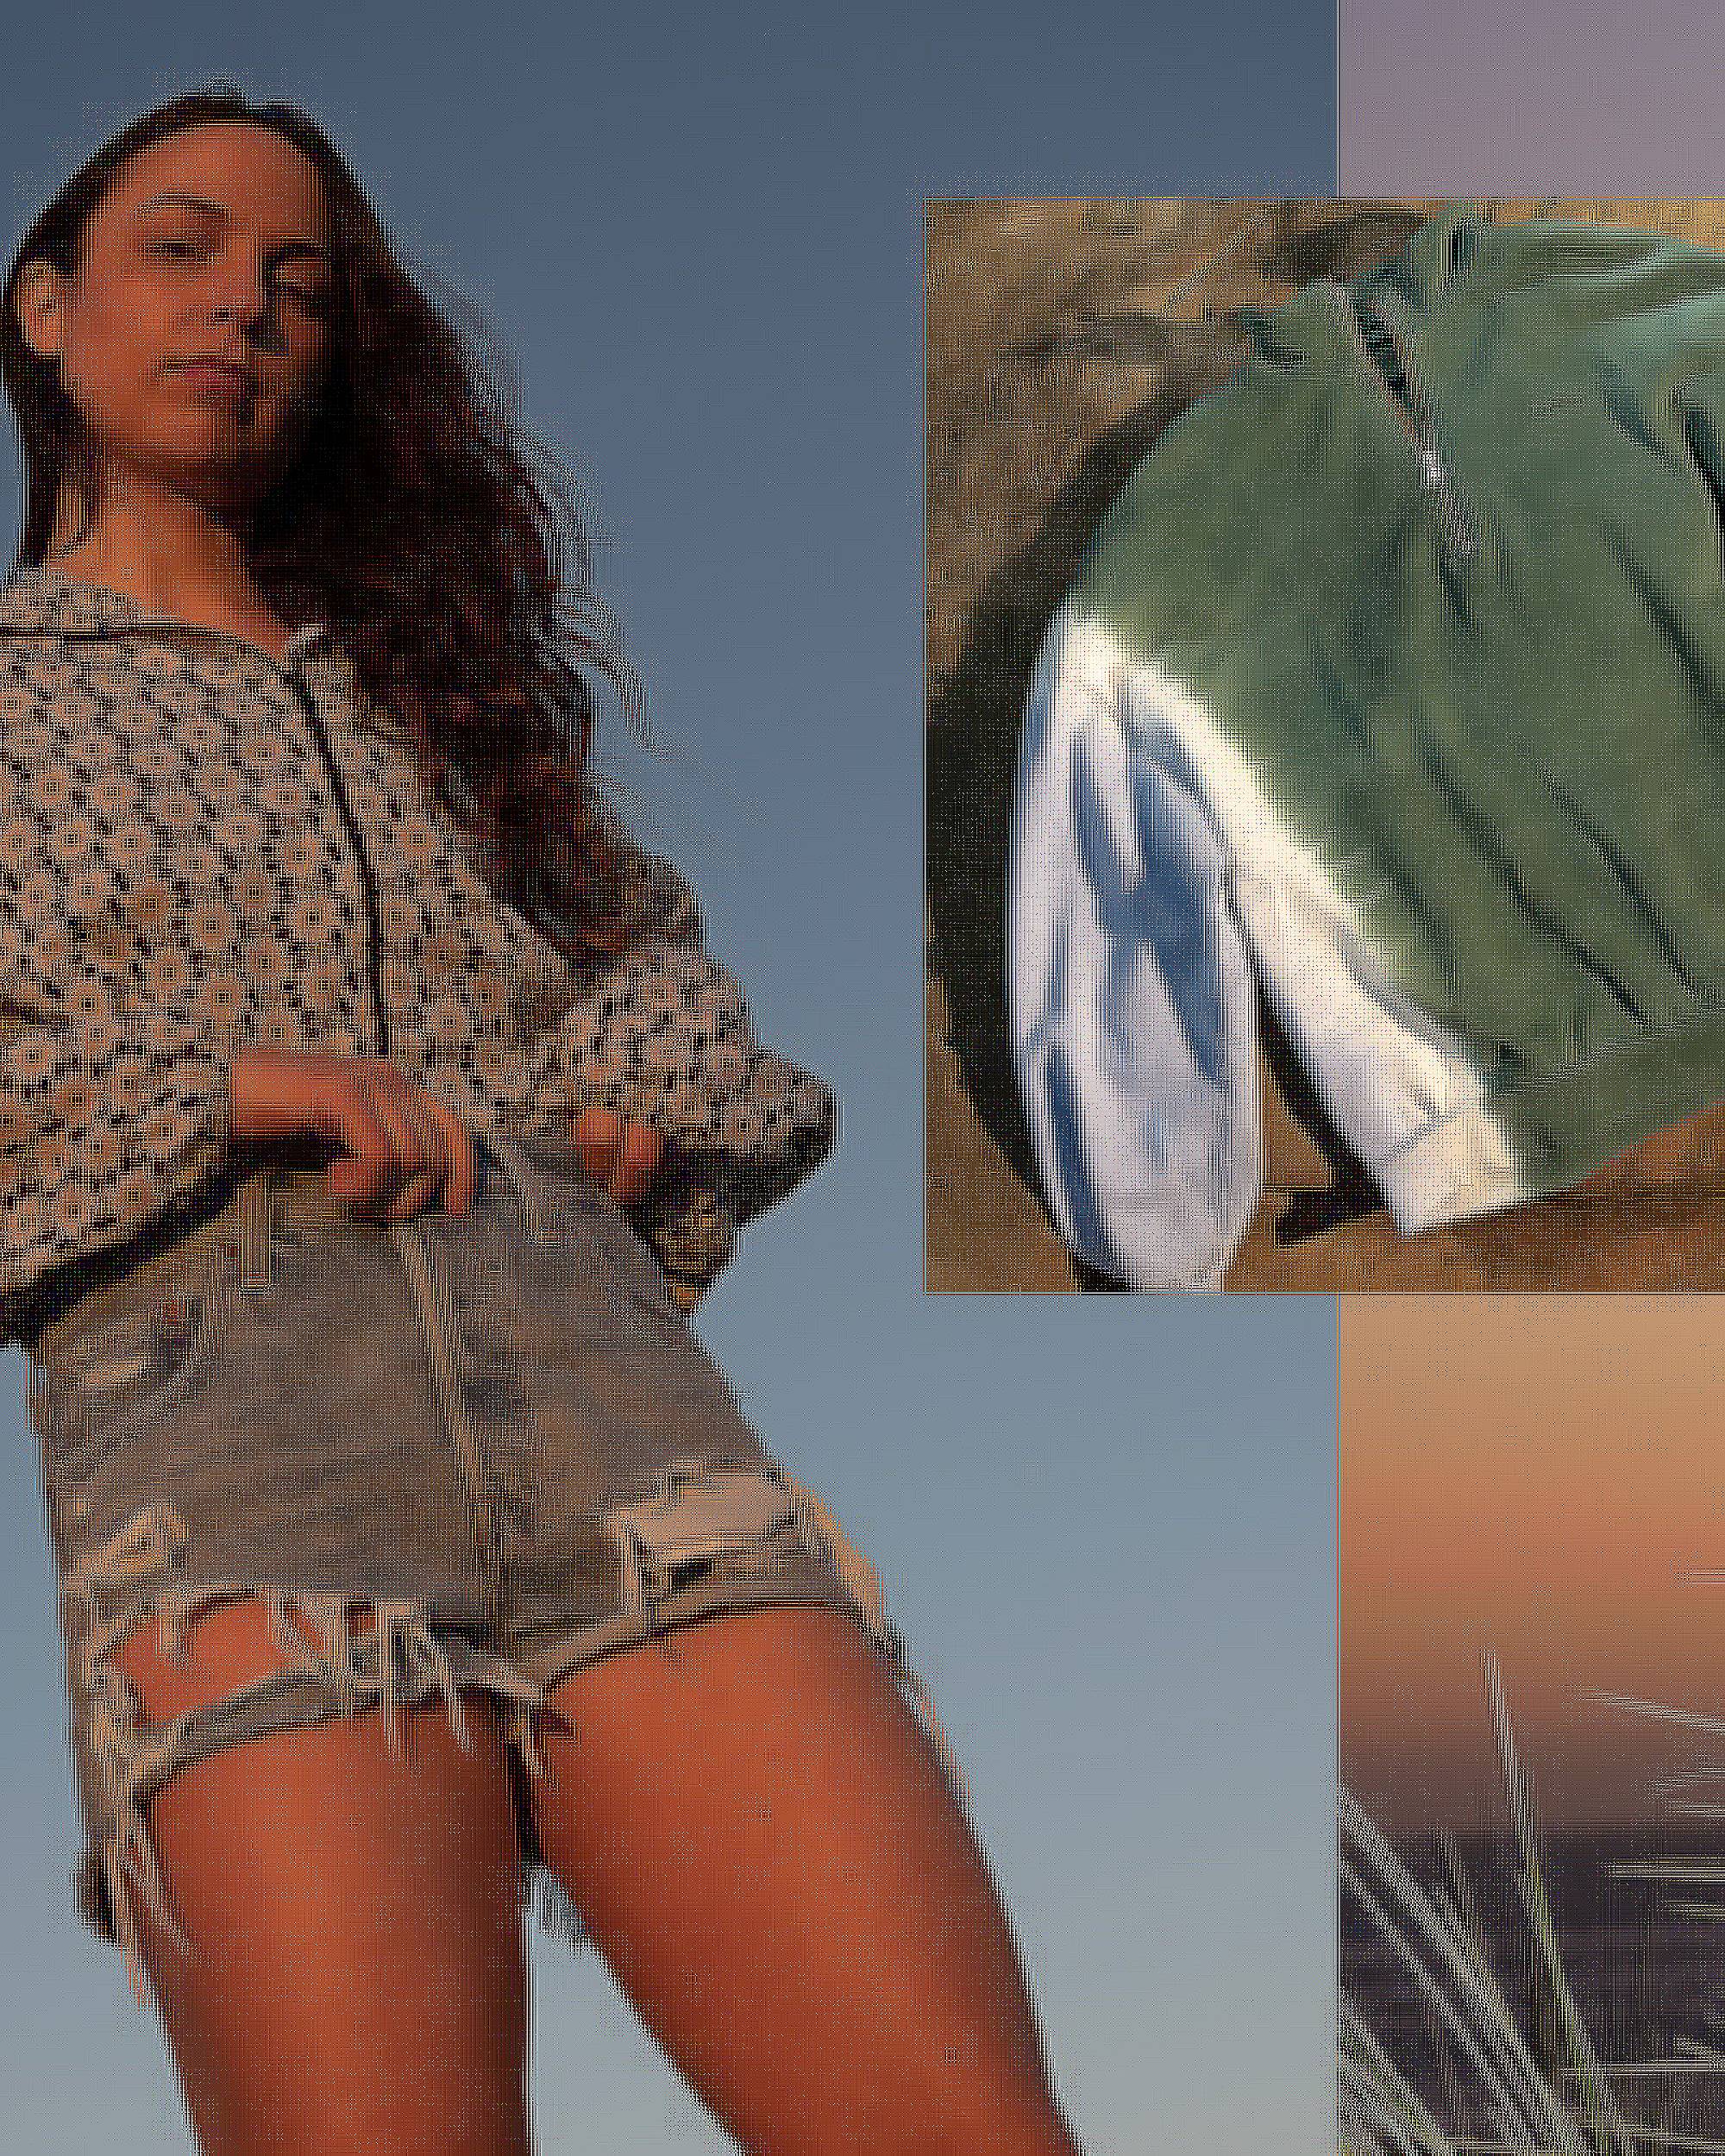 Collage of four images: the left image is of the beach at sunset, the middle left image is of a model wearing a floral jacket and denim cutoff shorts, the middle right image is of a turquoise sweatshirt laid on a rock and the furthest right image is of a person standing on one foot on a ledge, raising their arms while wearing a purple shirt, denim trucker jacket and denim blue jeans.